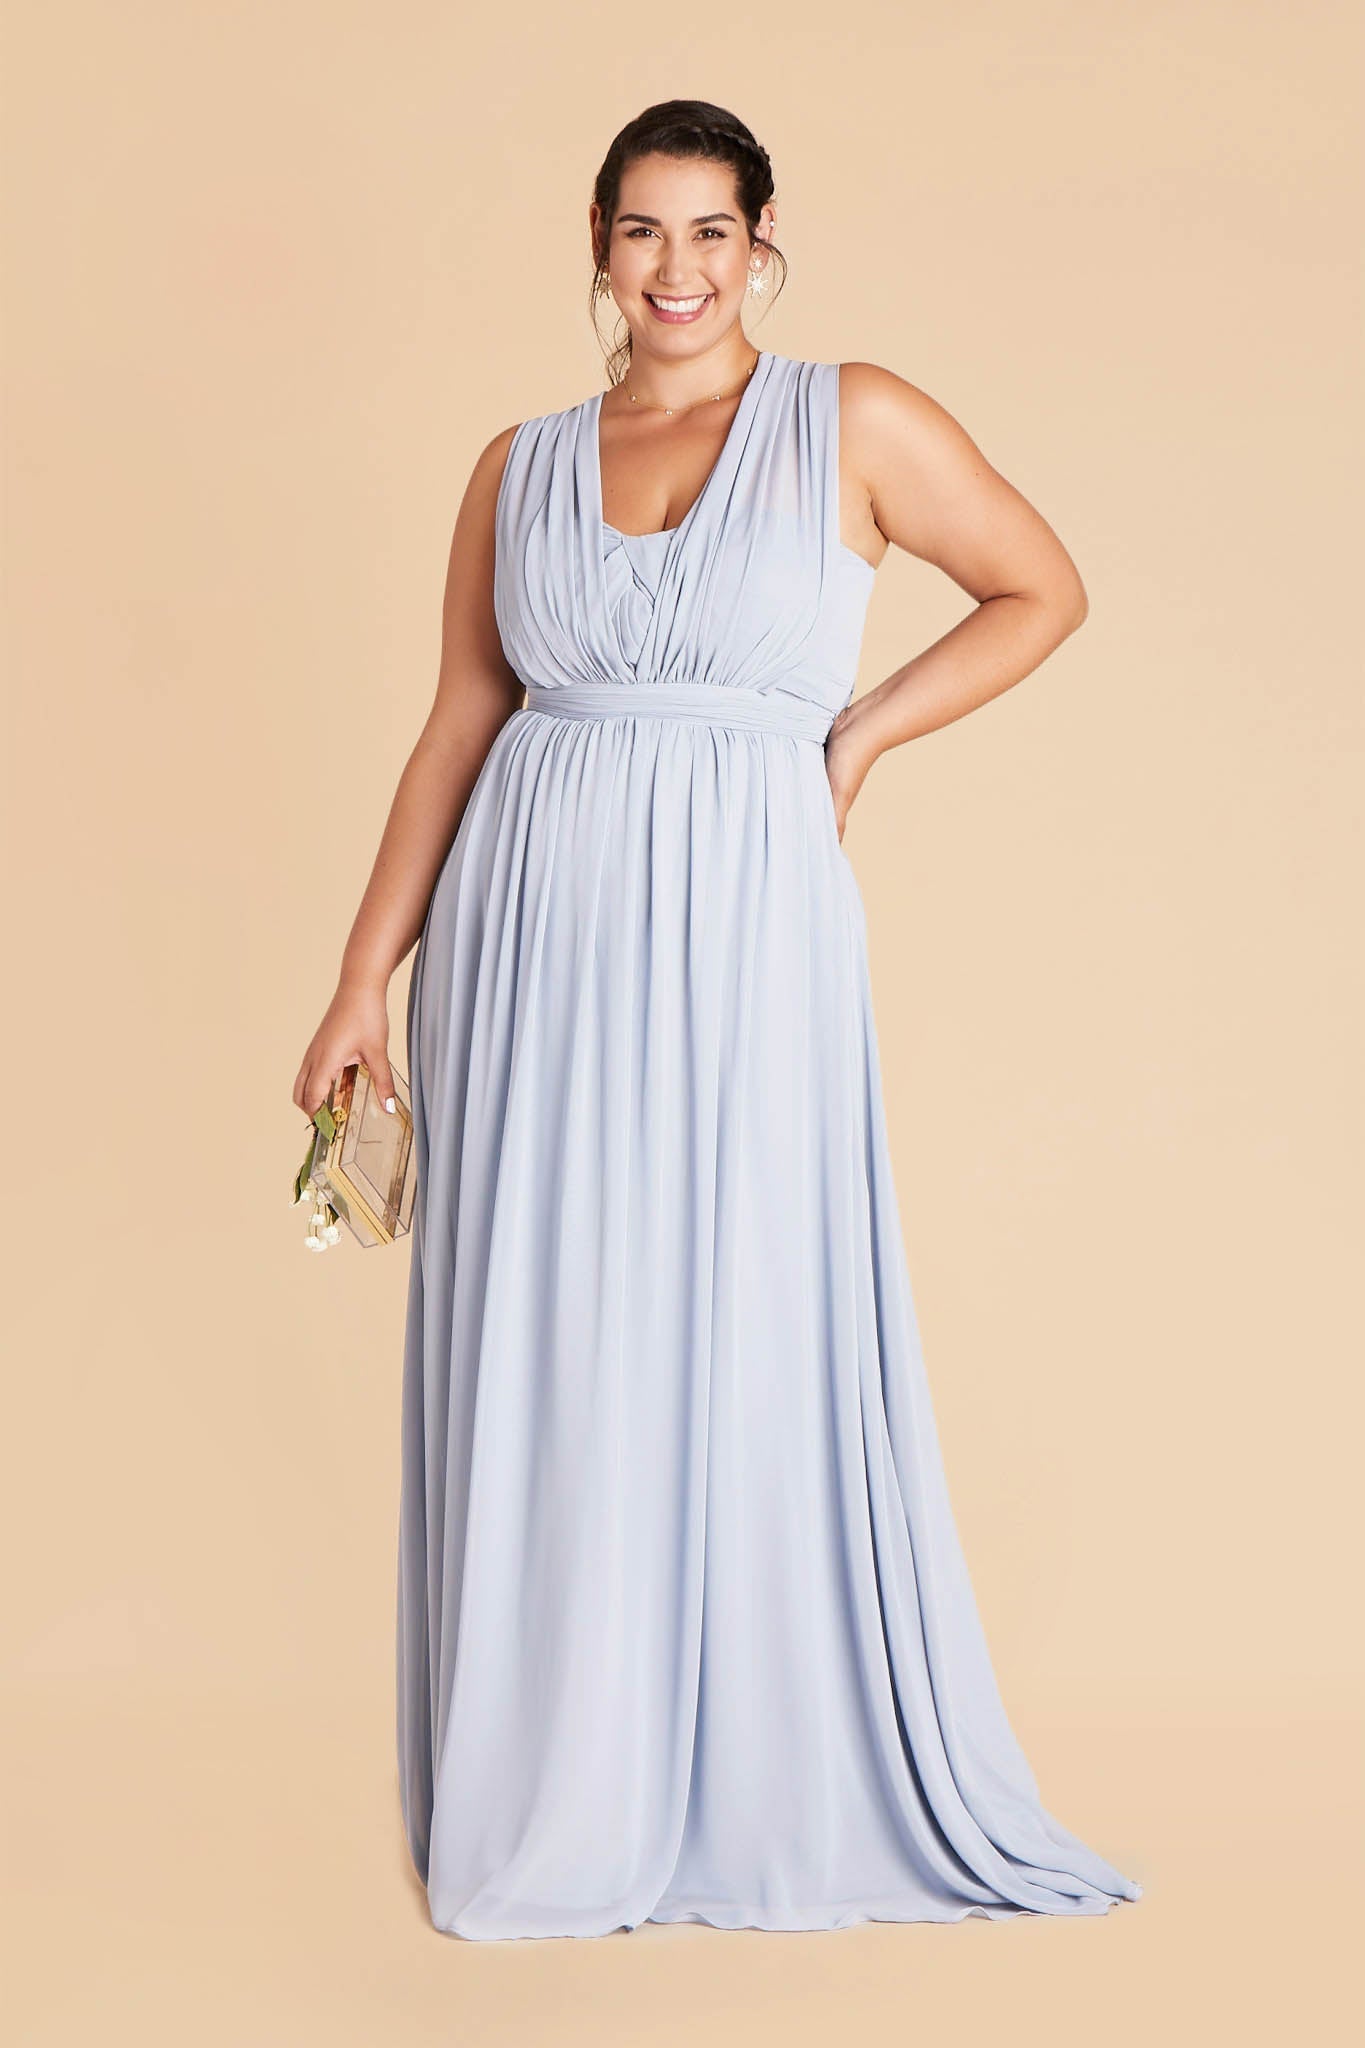 Grace convertible plus size bridesmaid dress in ice blue chiffon by Birdy Grey